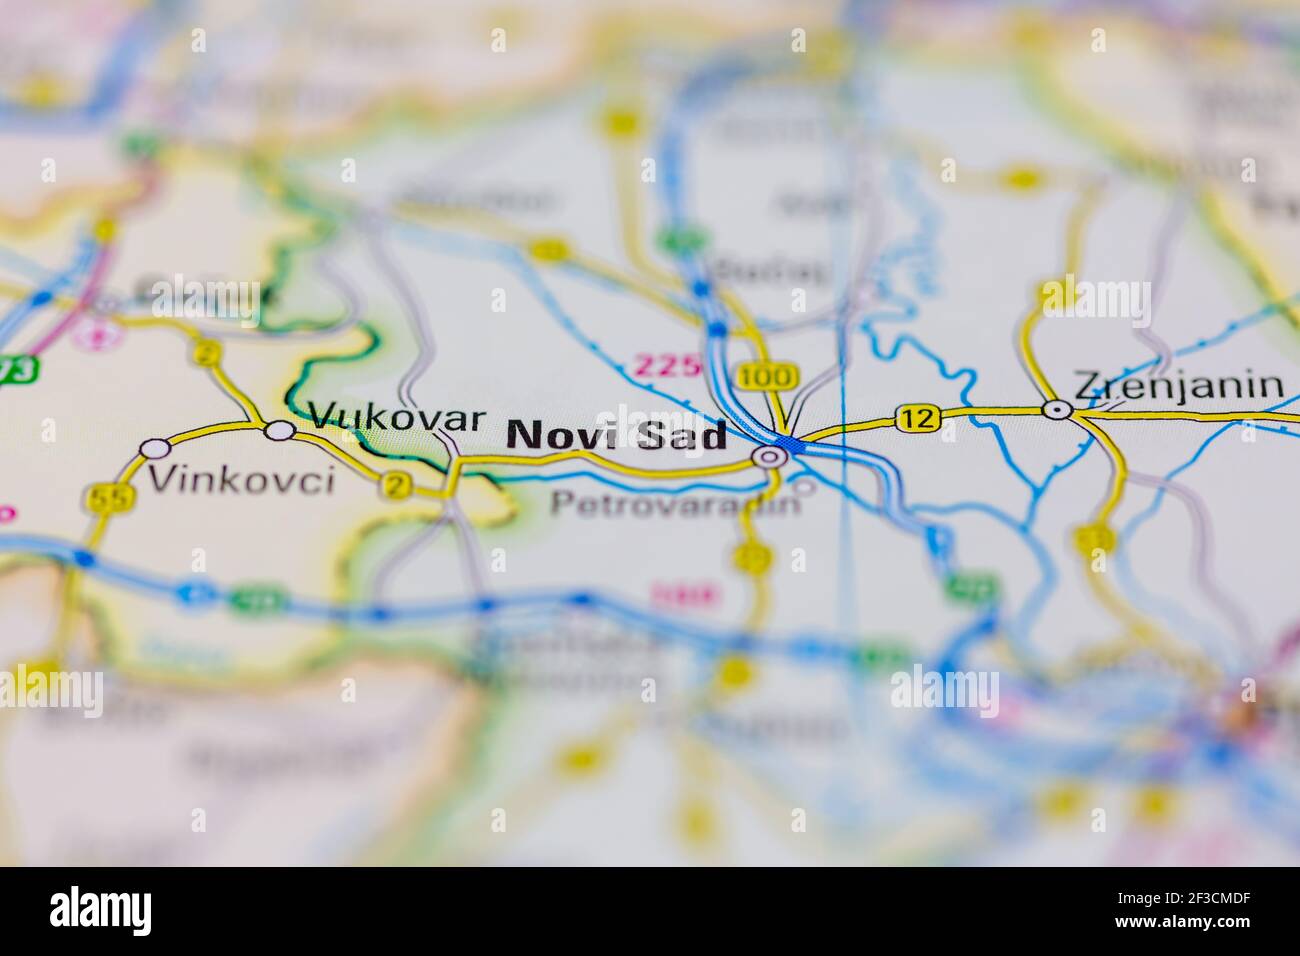 Novi Sad Shown on a geography map or road map Stock Photo